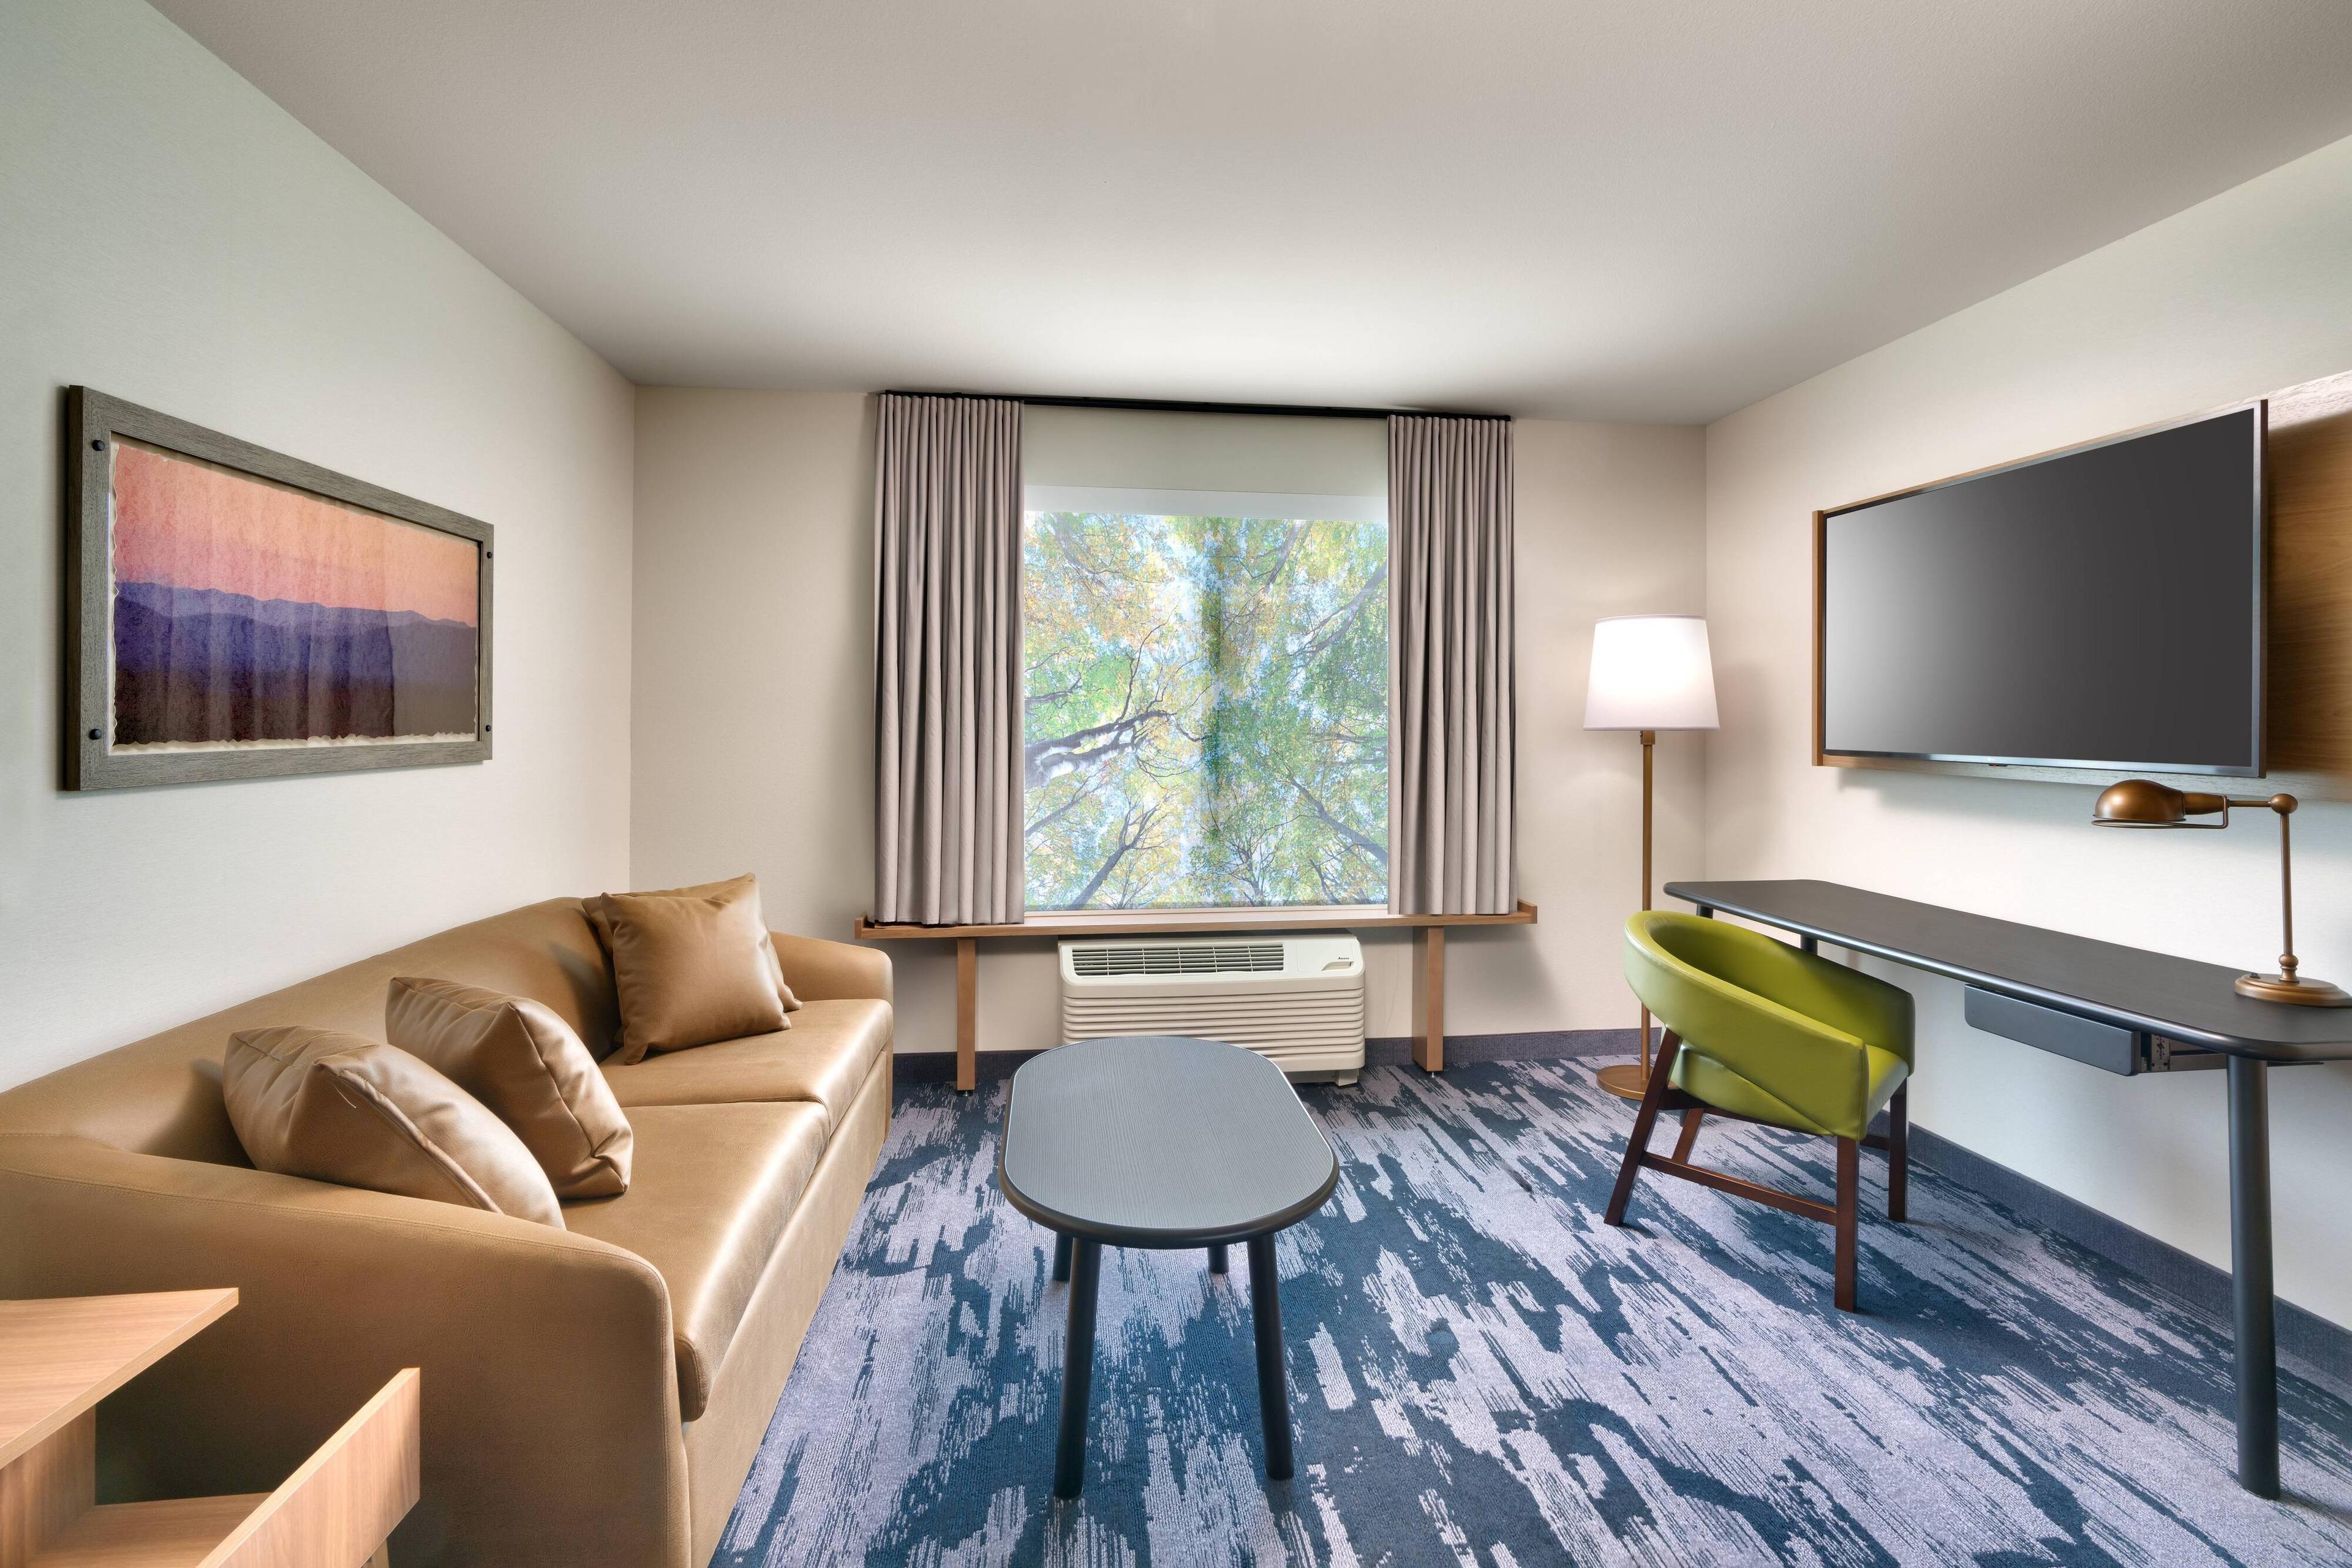 Rest and relax in our rooms featuring separate living and sleeping areas. Suites can accommodate your entire travel party thanks to our comfortable pullout sofas.